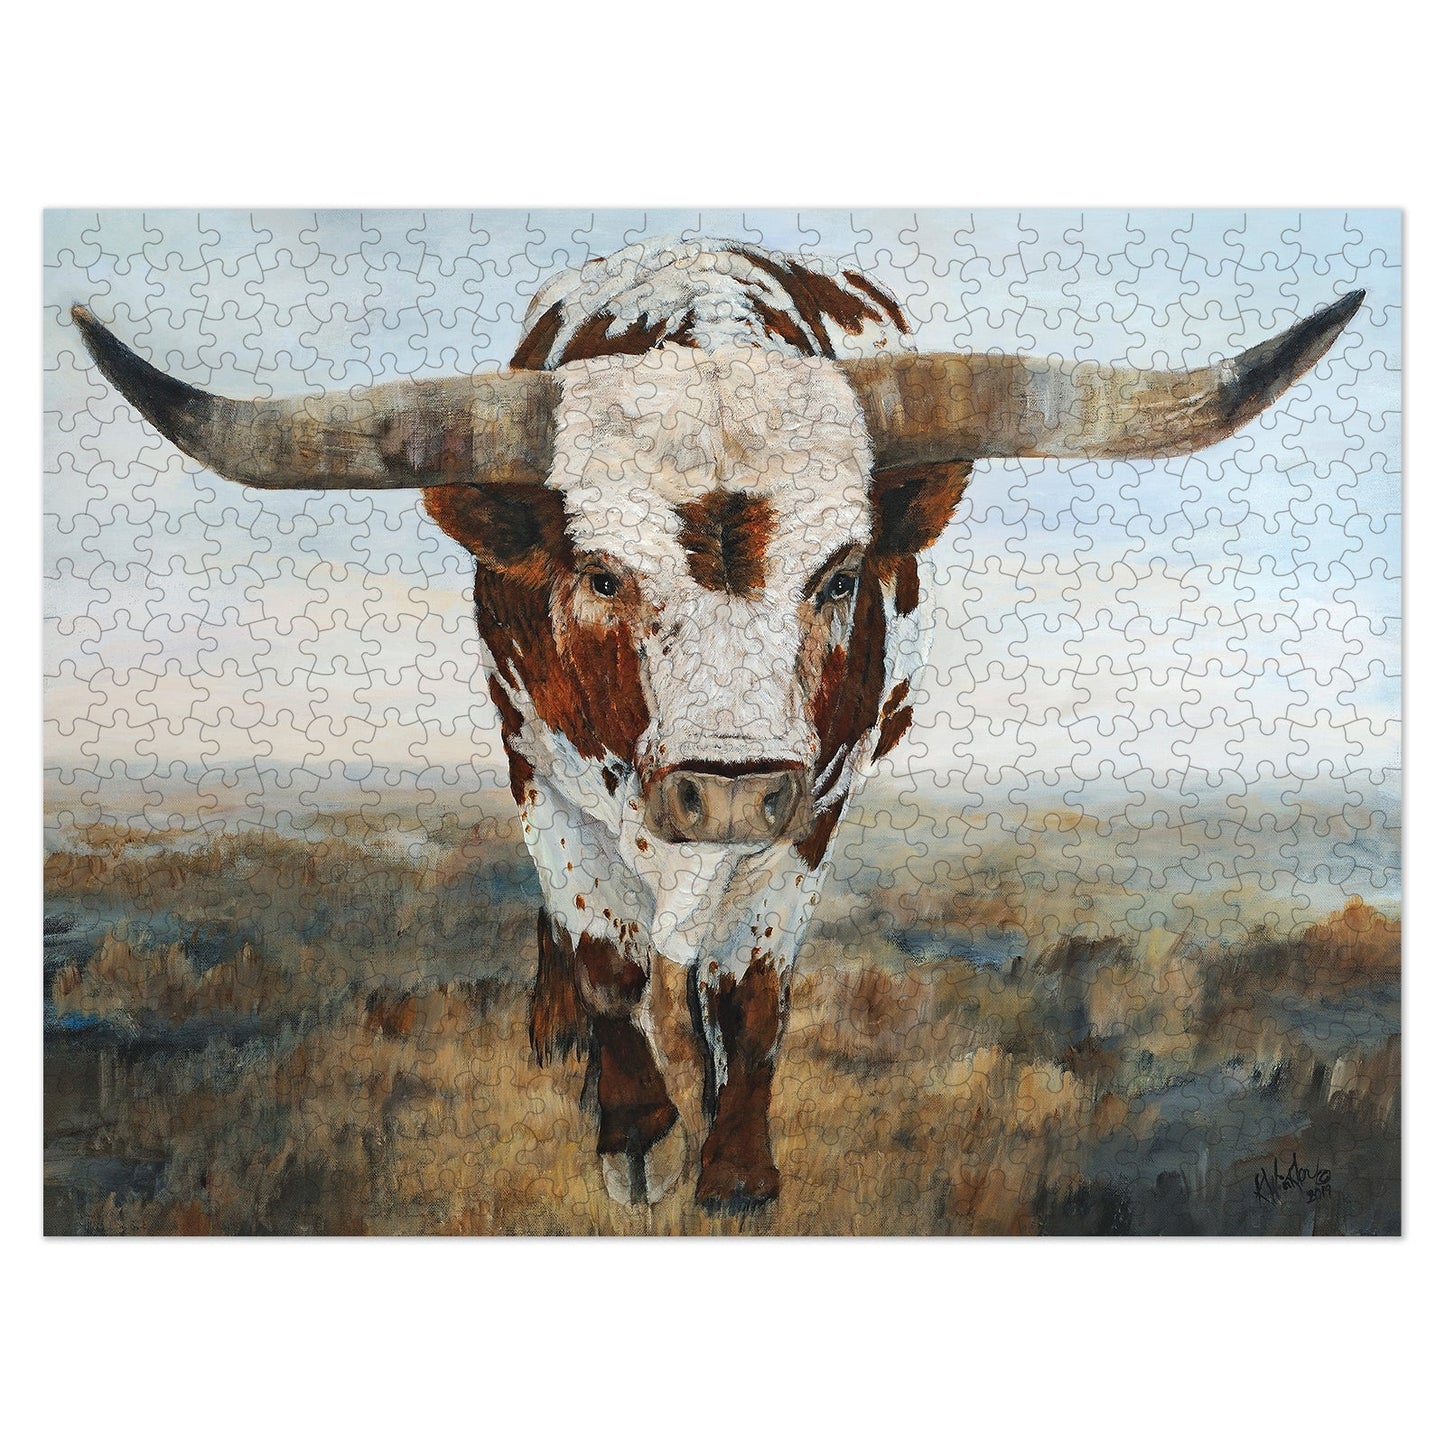 500 Piece Jigsaw Puzzle, 16x20 Inches, RAMBLIN' ON Artwork by Kathy Winkler